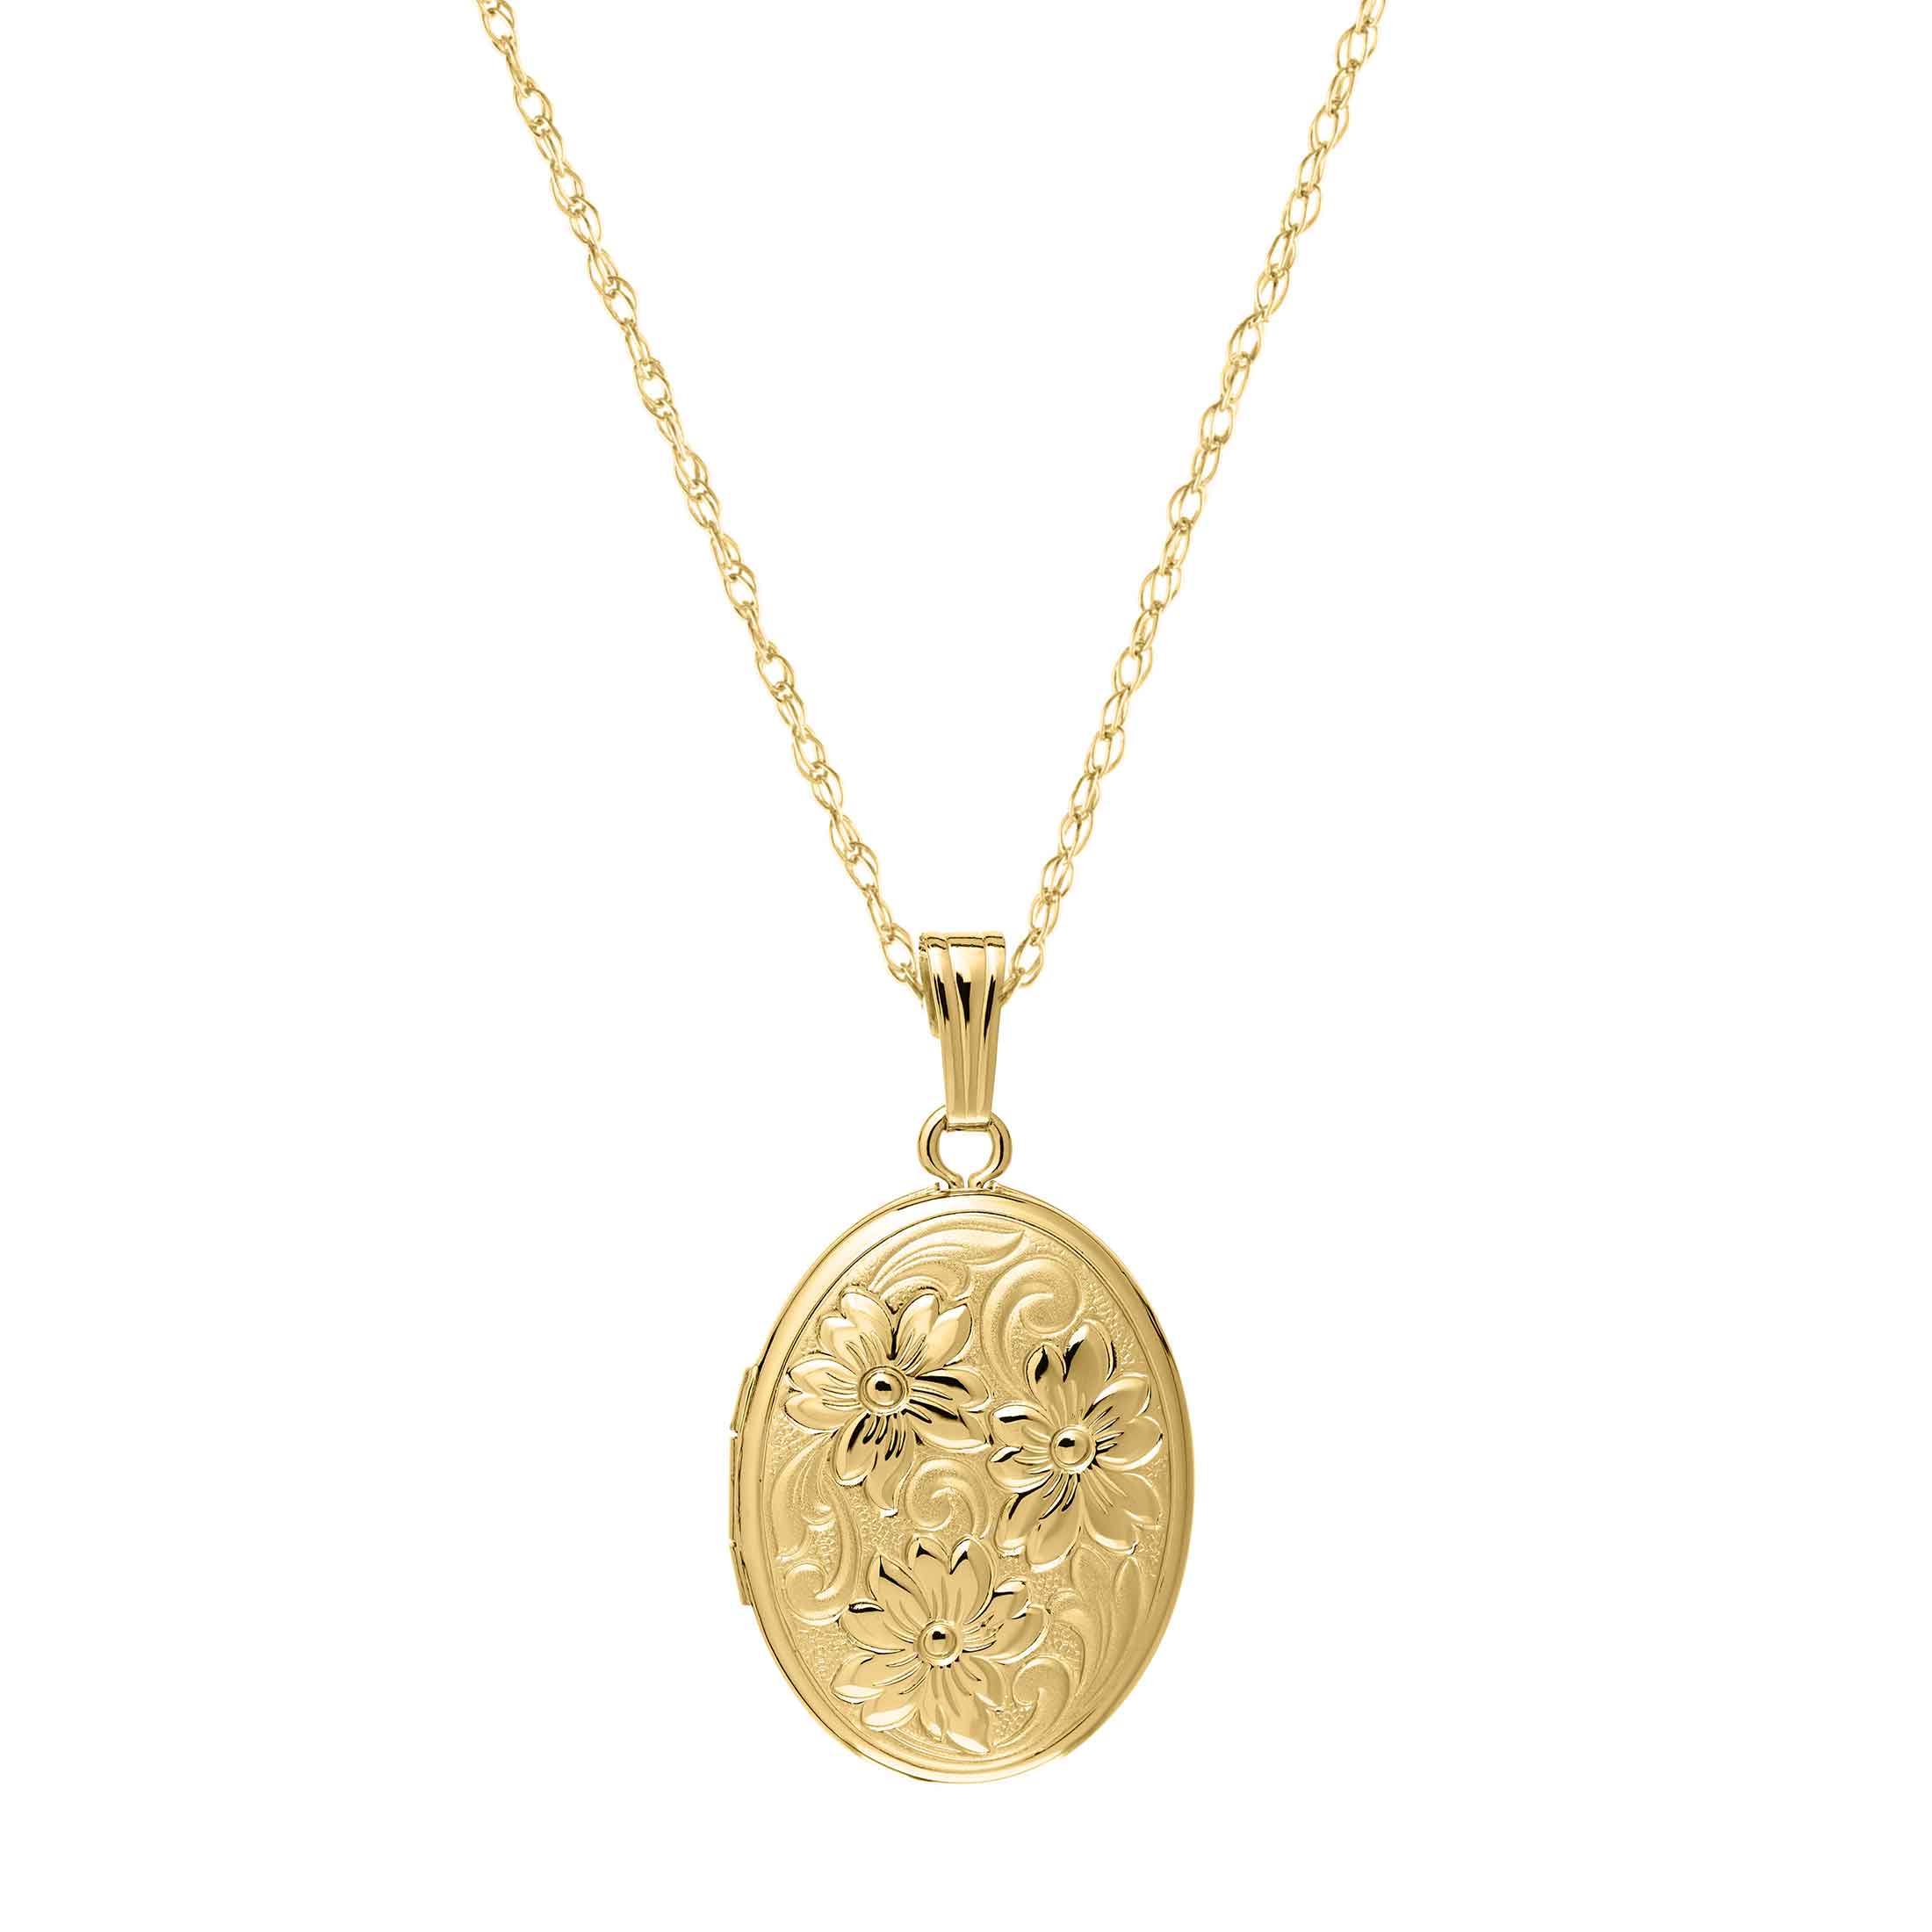 9ct Yellow Gold Engraved Oval Flower Locket Necklace